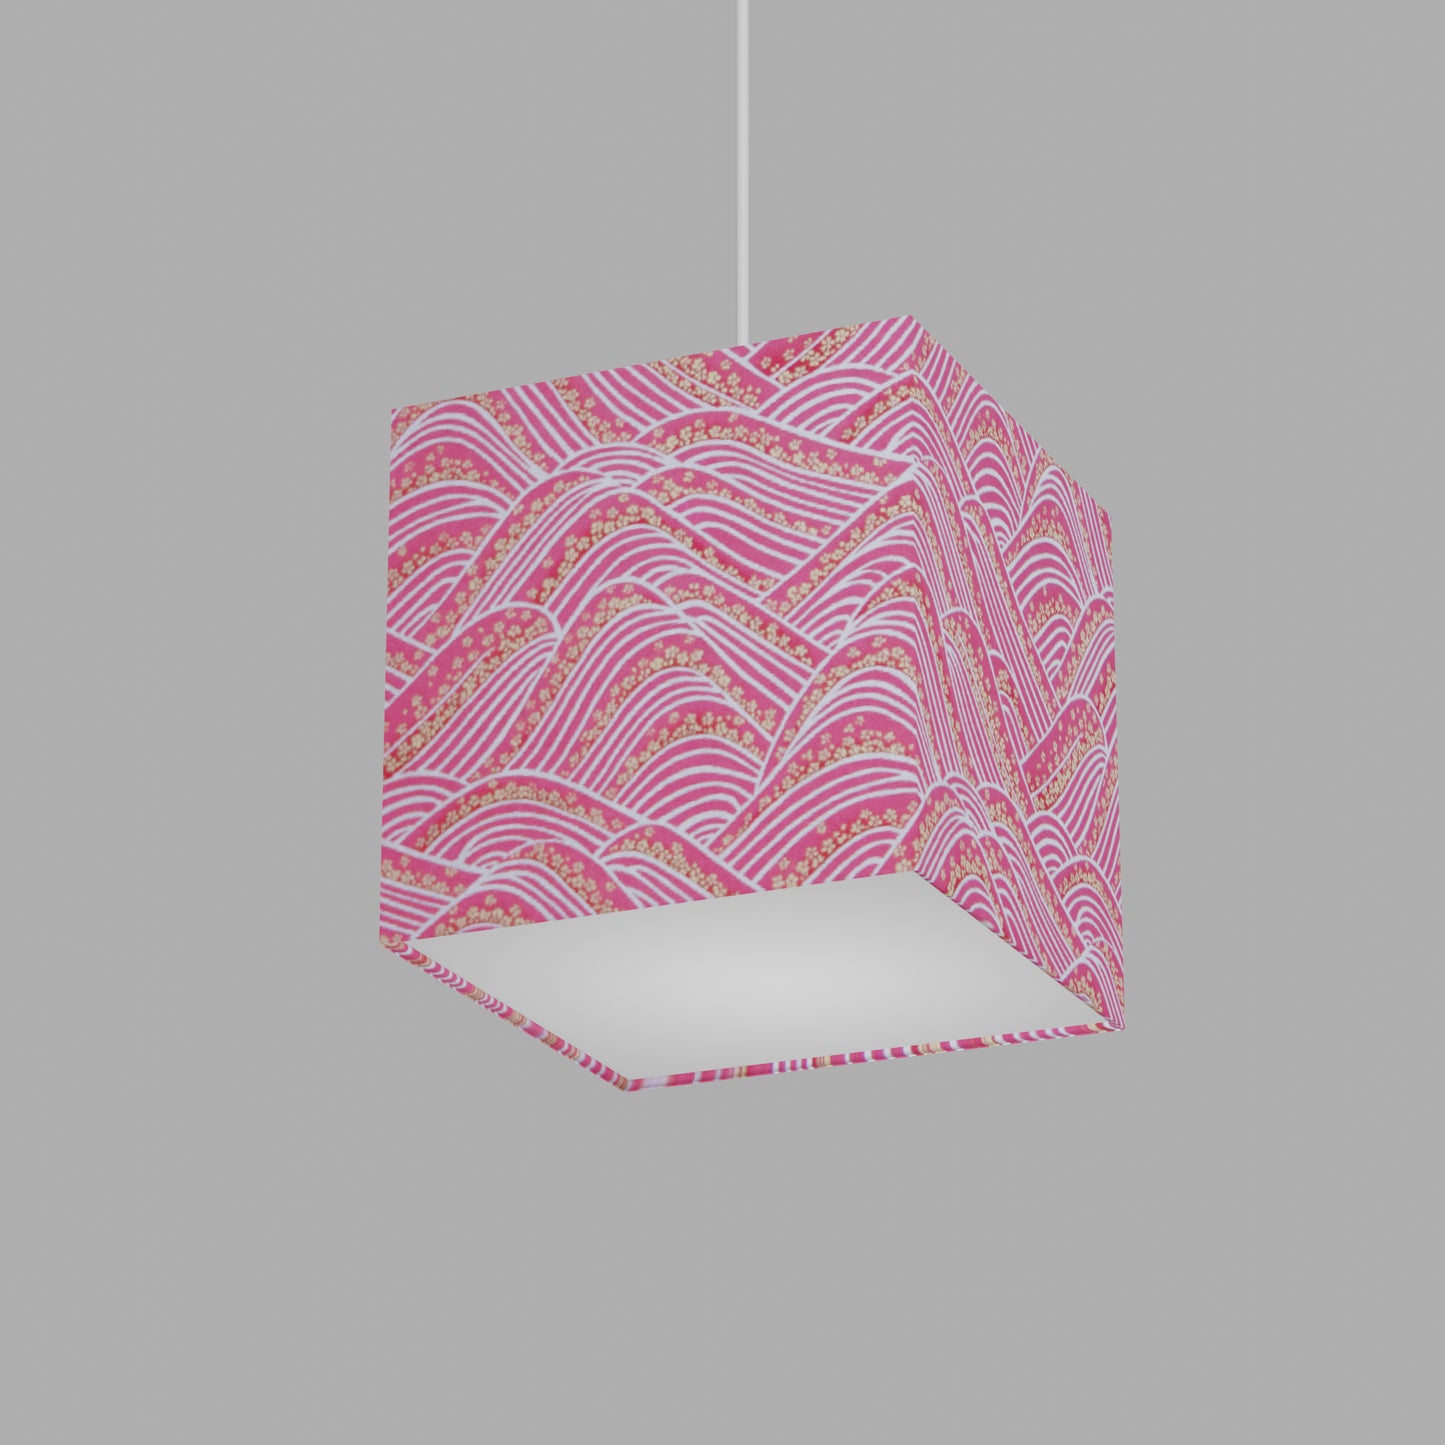 Square Lamp Shade - W04 ~ Pink Hills with Gold Flowers, 20cm(w) x 20cm(h) x 20cm(d)